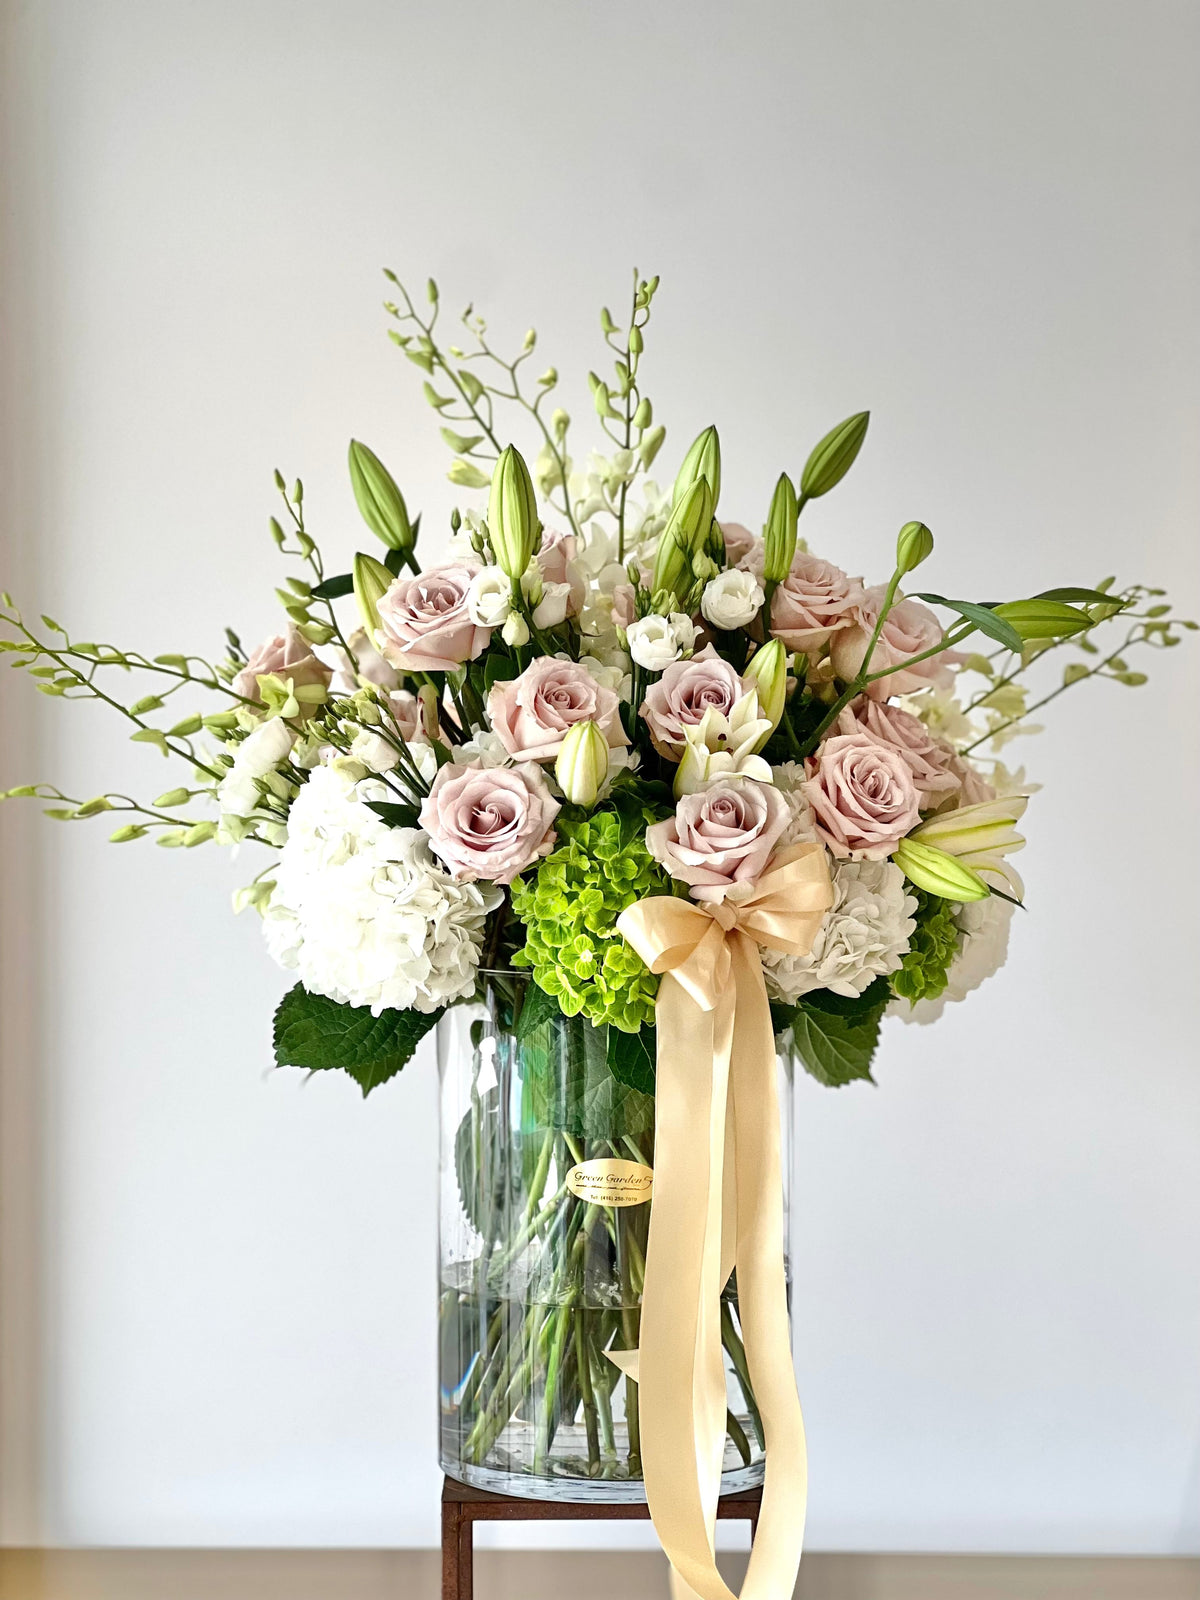 Cheerful Get Well Soon Flowers from Yonge Florist, Vase Arrangement of roses, hydrangeas snd orchids, GTA Delivery